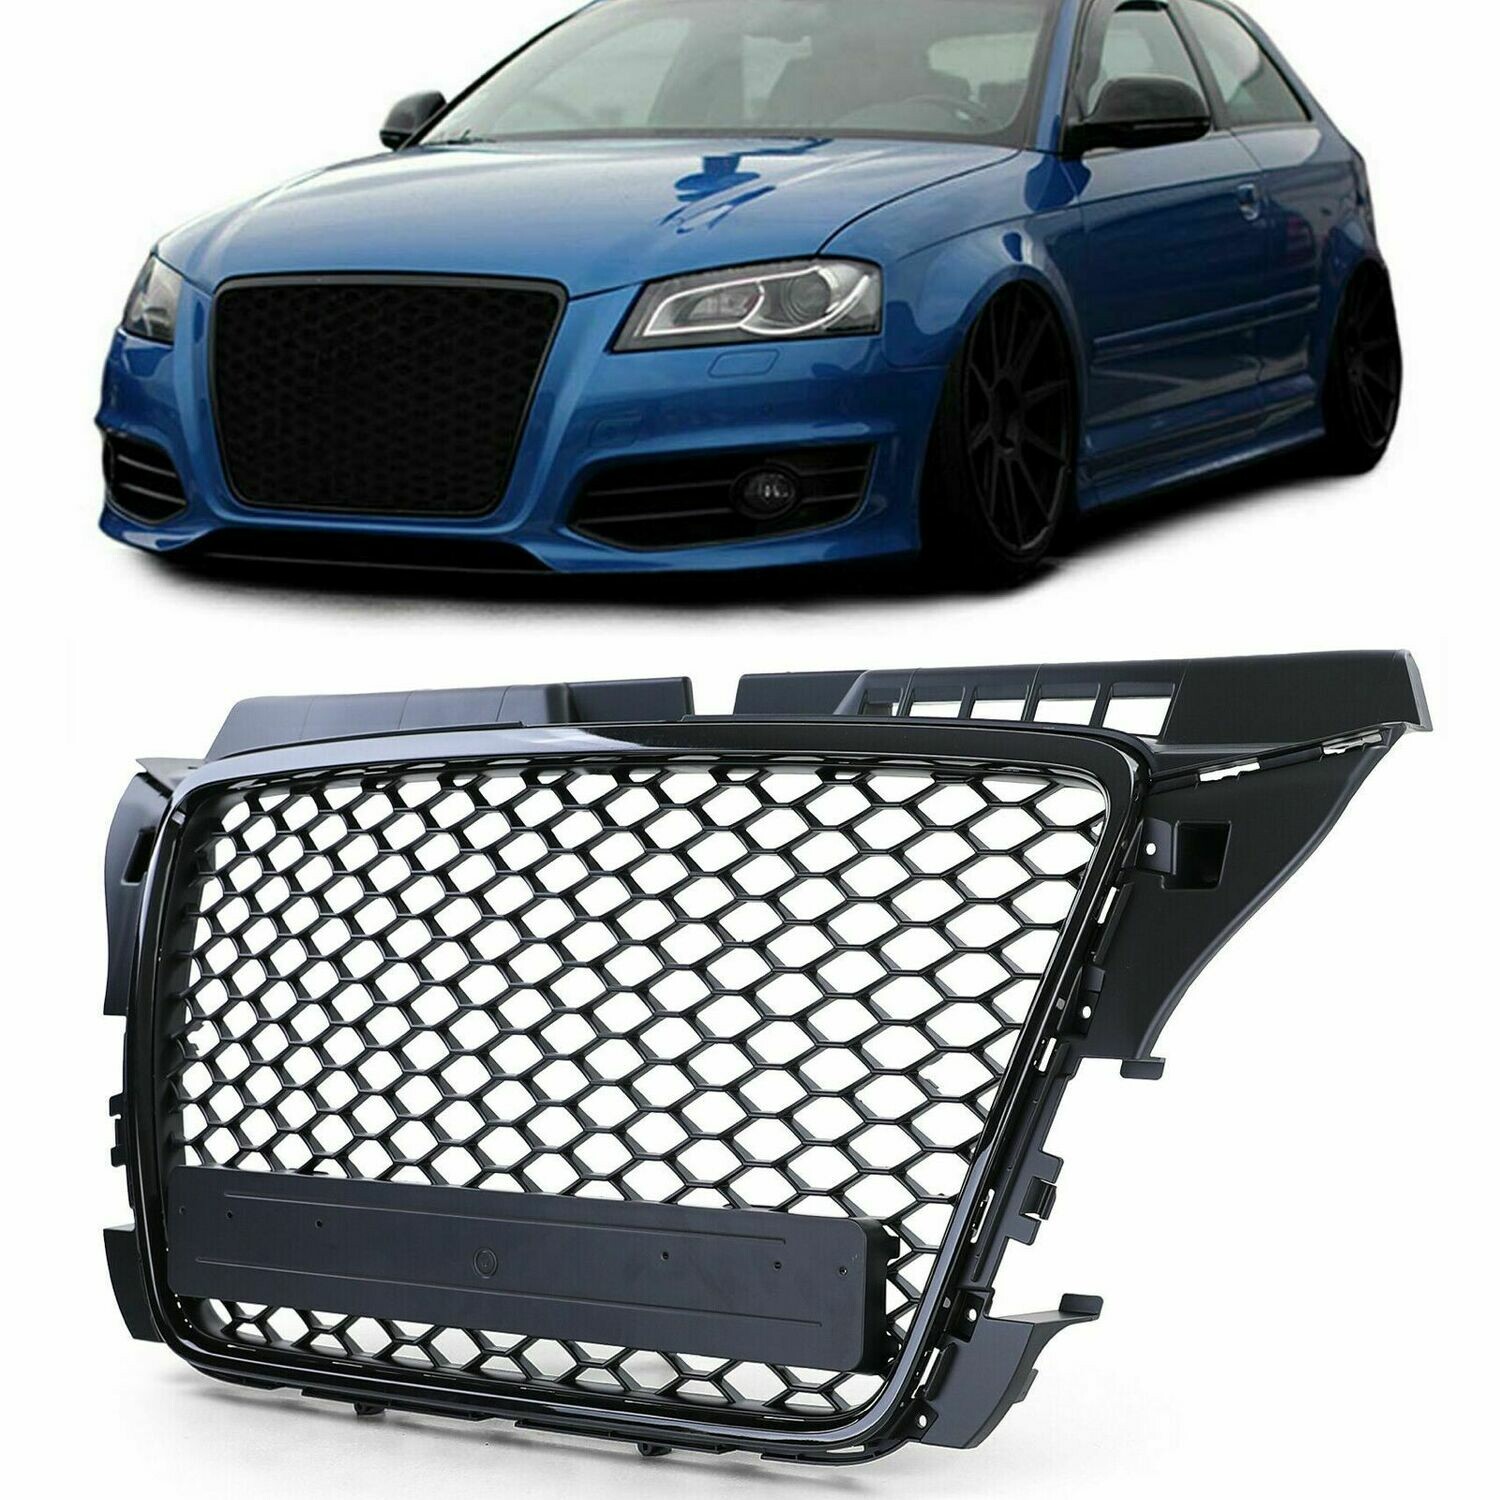 Sport Grill grille without emblem Black for Audi A3 8P 08-12